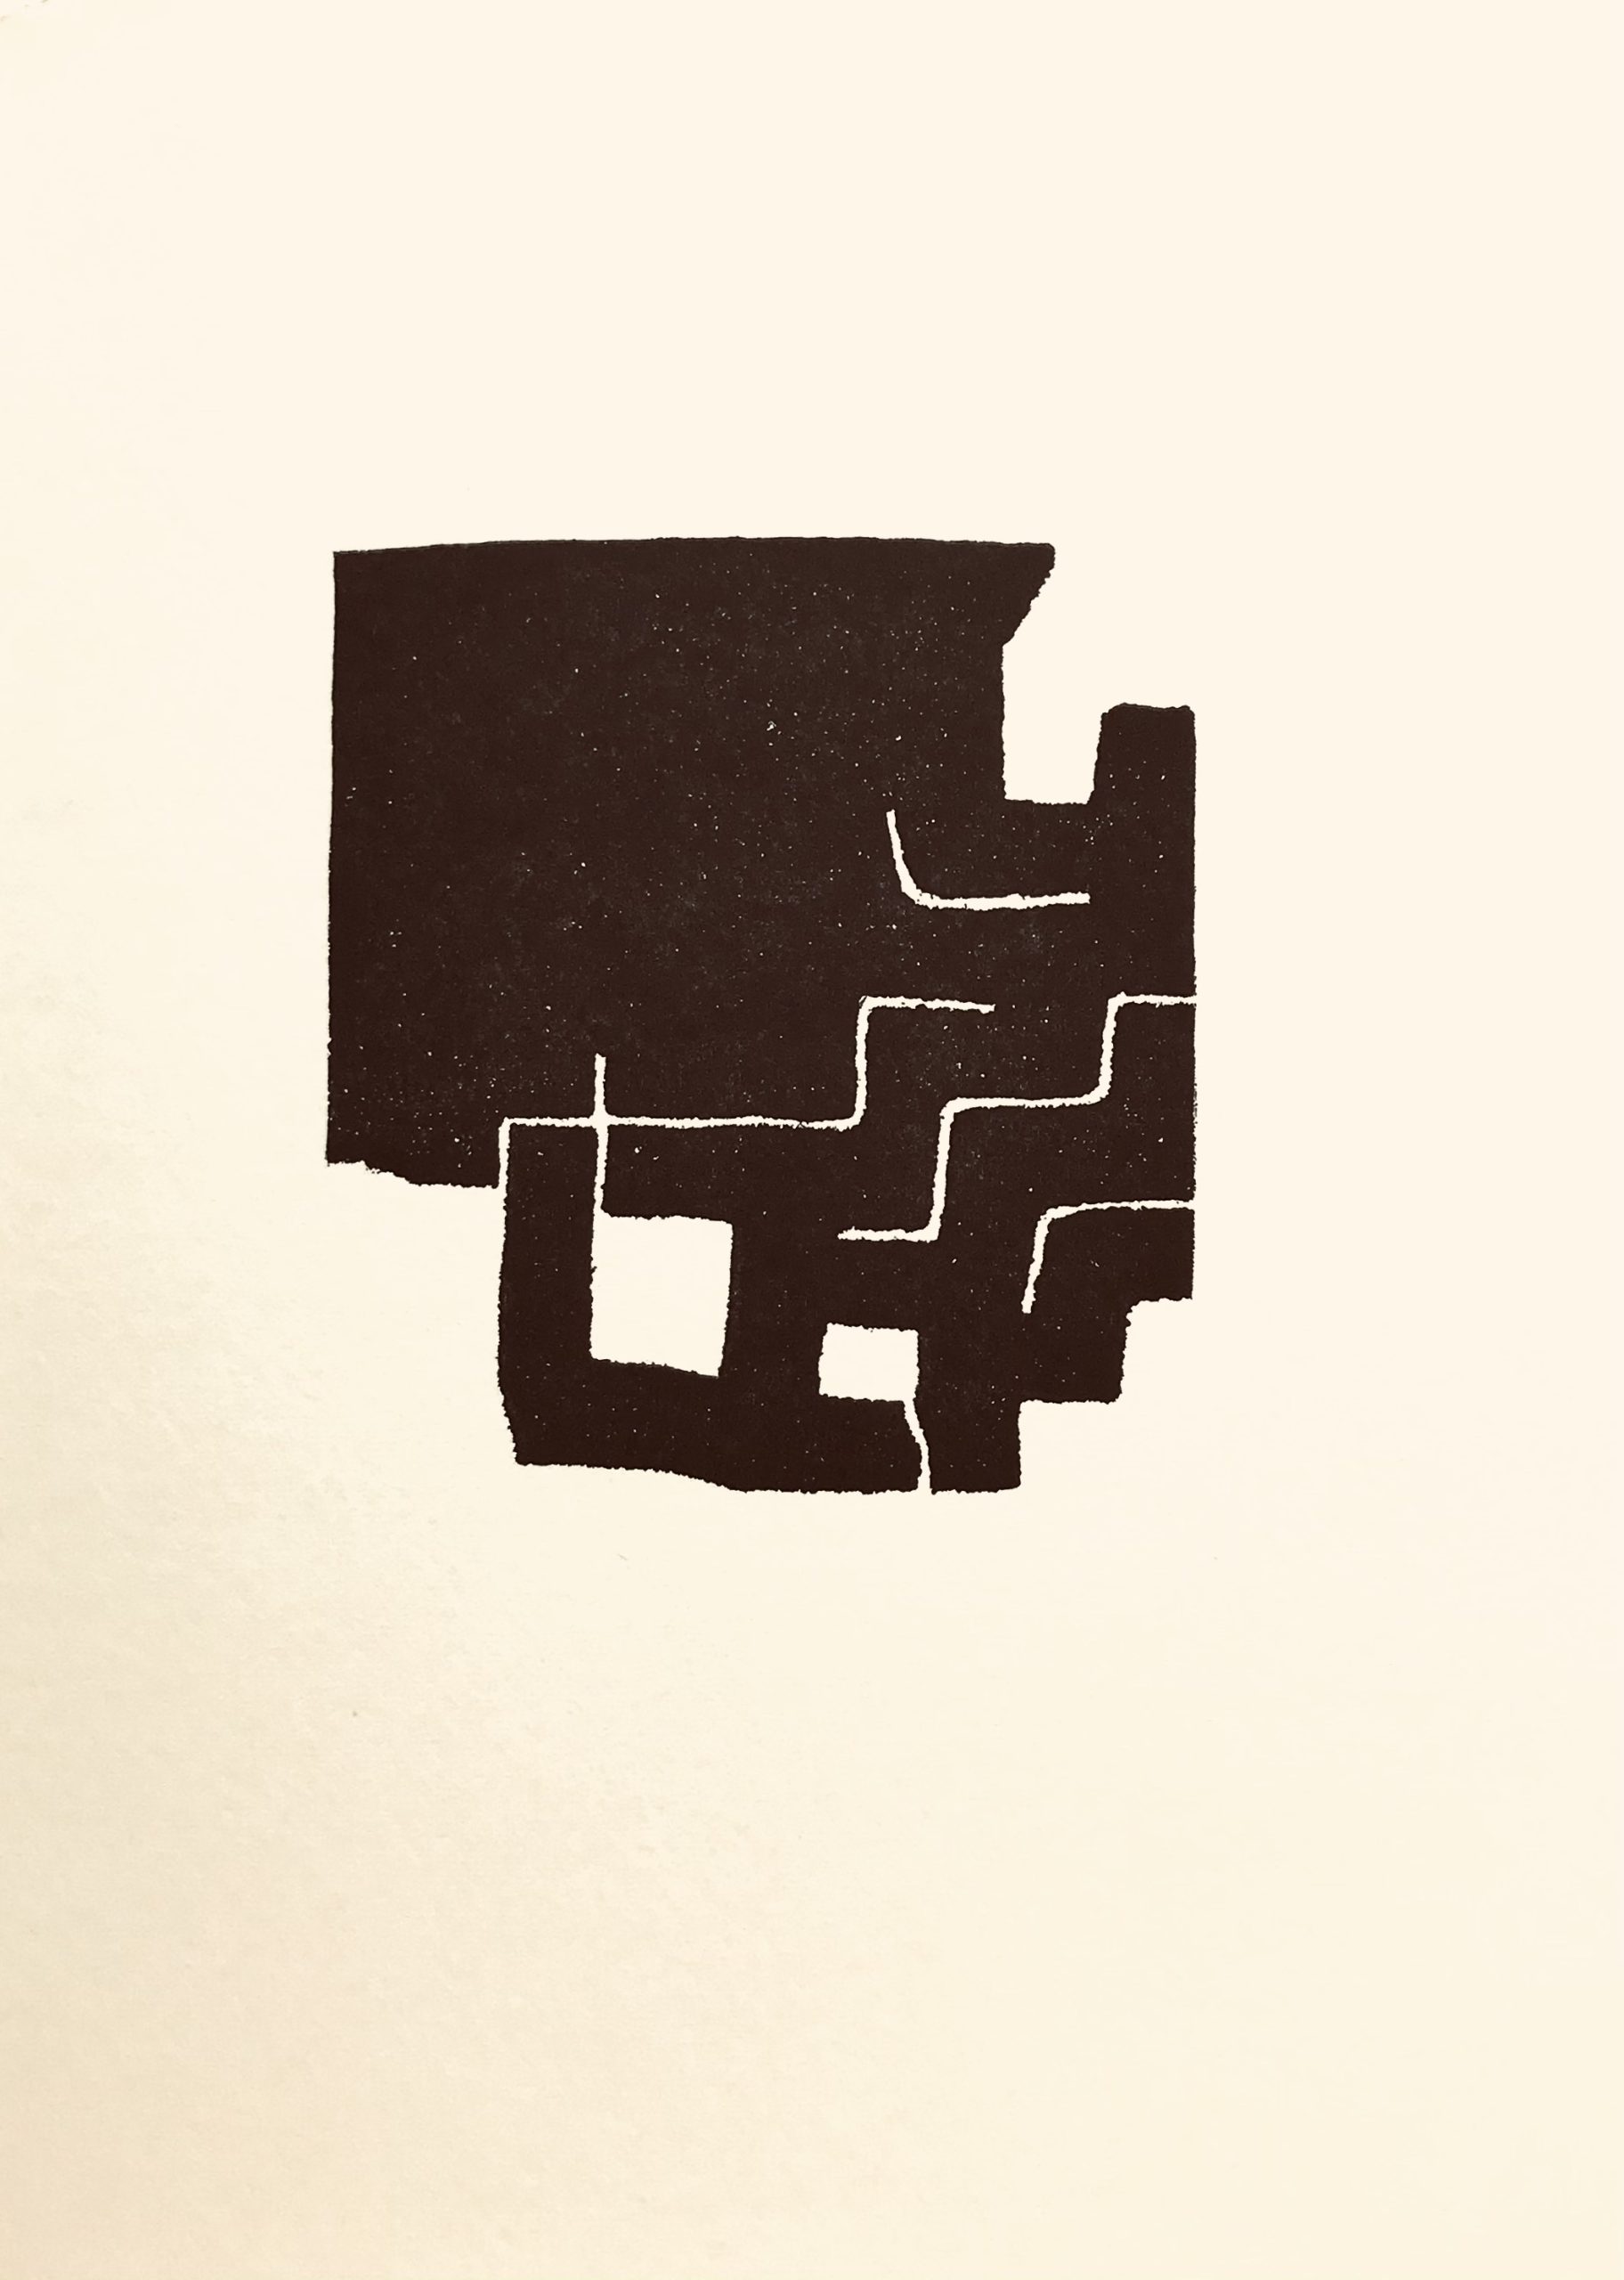 Browse our large collection of prints for Eduardo chillida